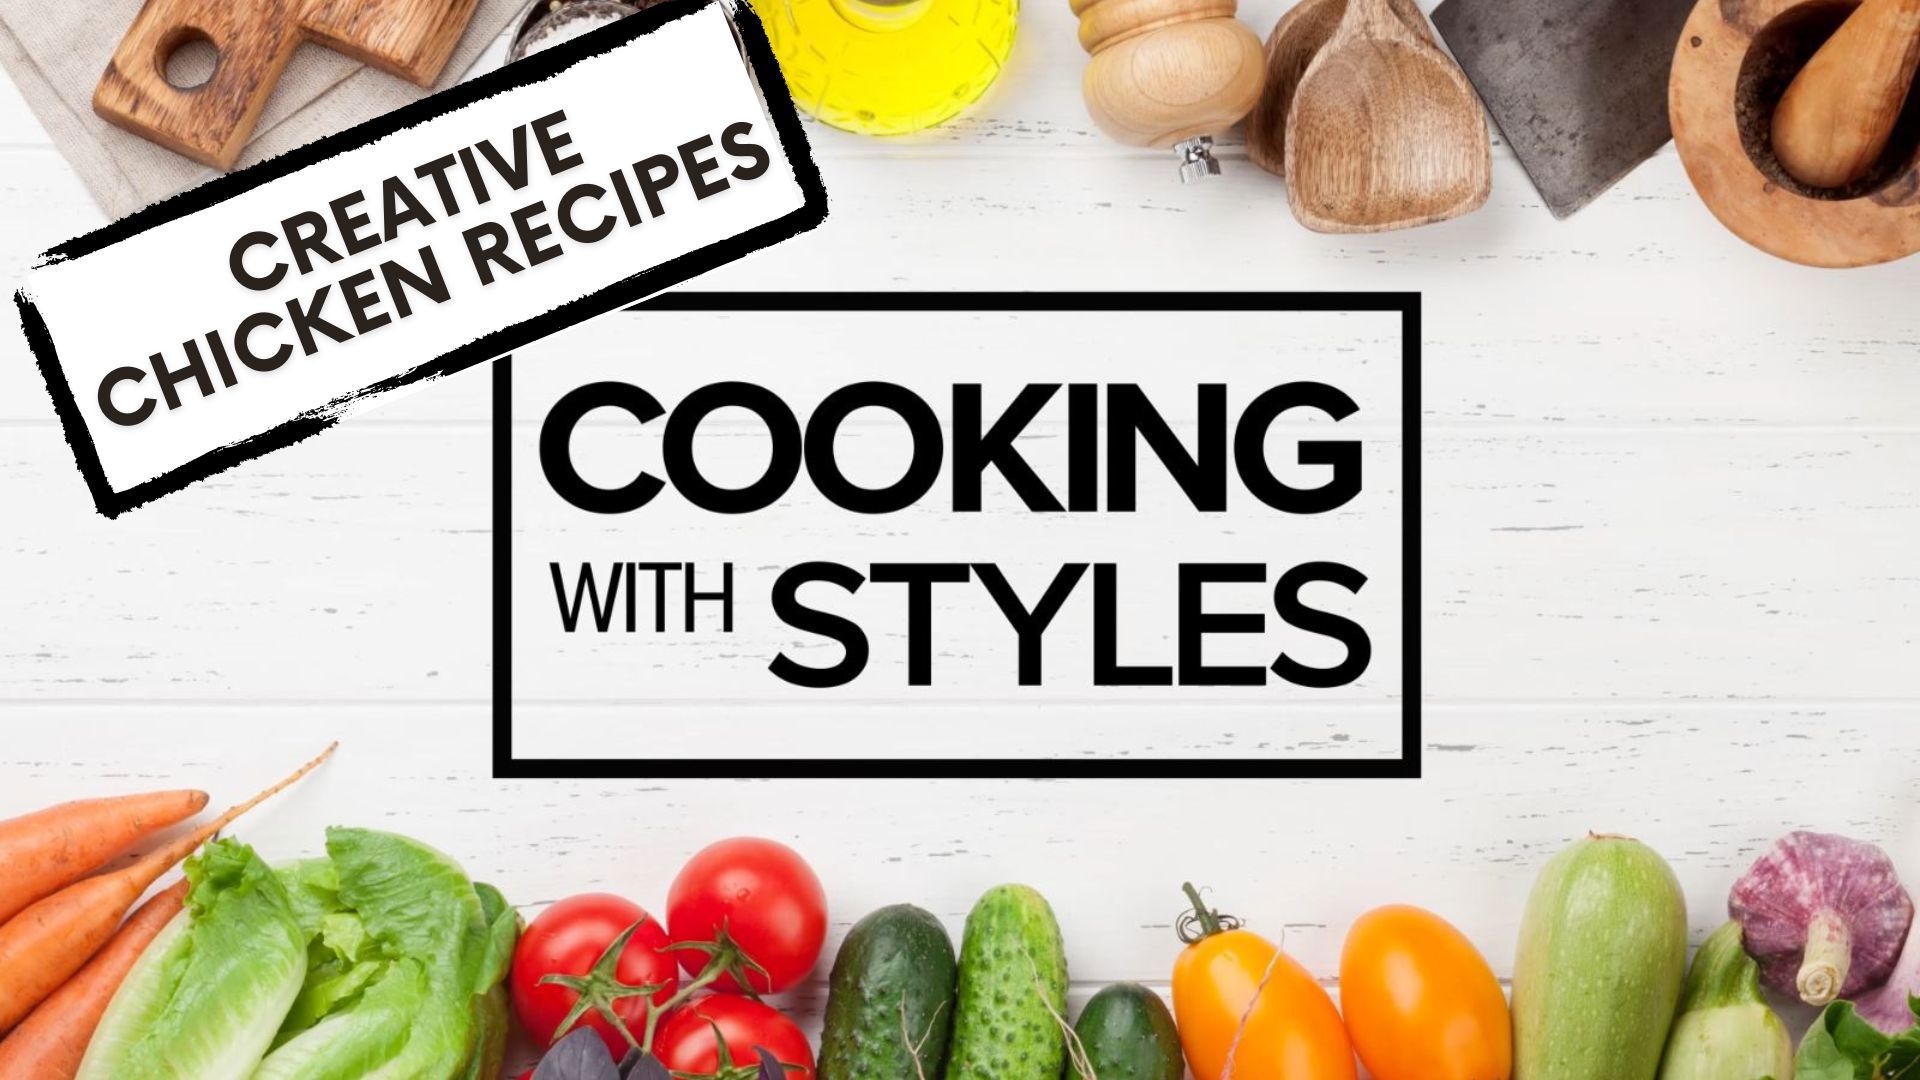 Shawn Styles shares ways you can get creative with cooking chicken. From elevated chicken tacos to Huli Huli chicken on the grill, there are plenty of dishes to try.